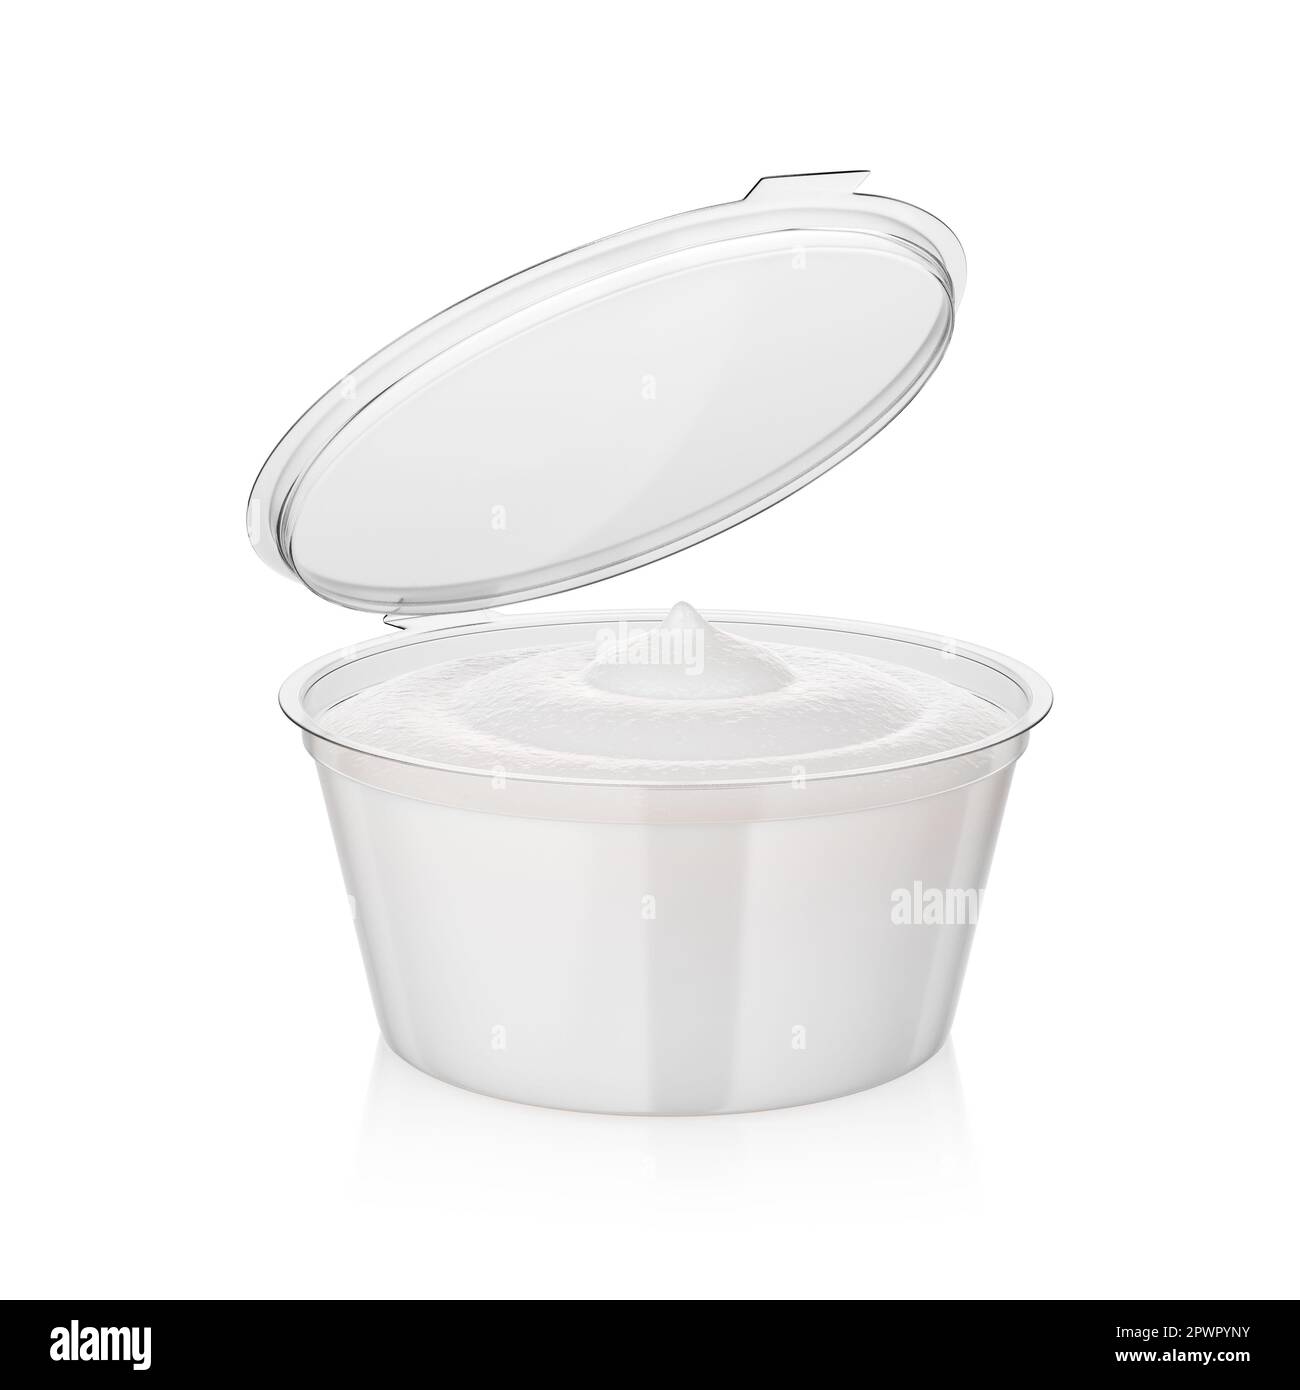 https://c8.alamy.com/comp/2PWPYNY/open-creamy-sauce-in-fast-food-dip-container-isolated-on-white-3d-rendering-illustration-2PWPYNY.jpg